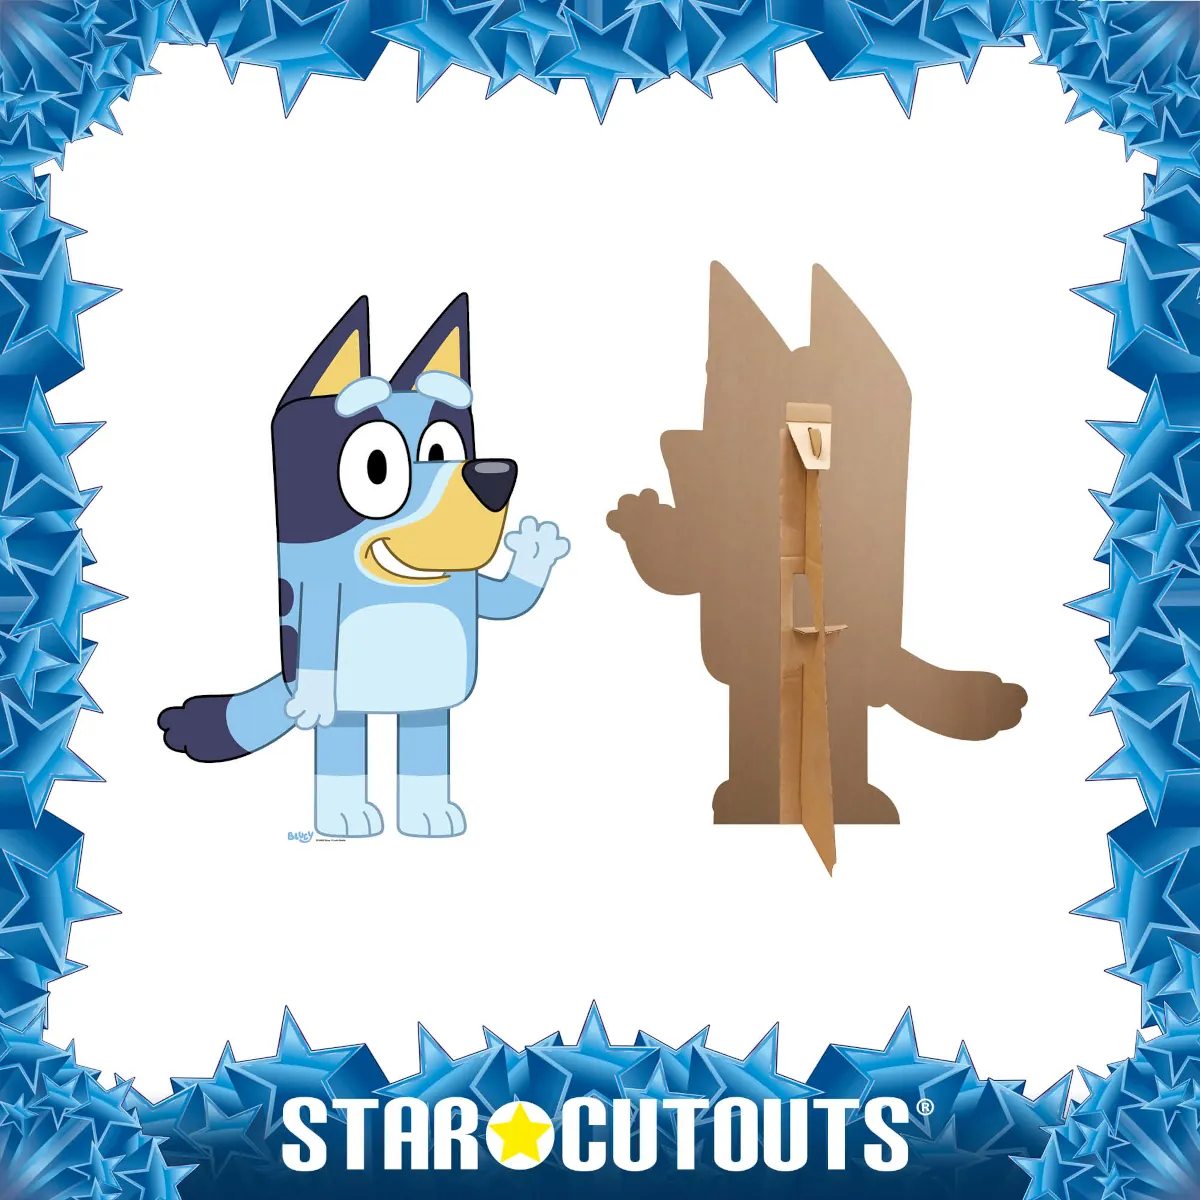 SC4463 Bluey (Television Series) Official Mini Cardboard Cutout Standee Frame